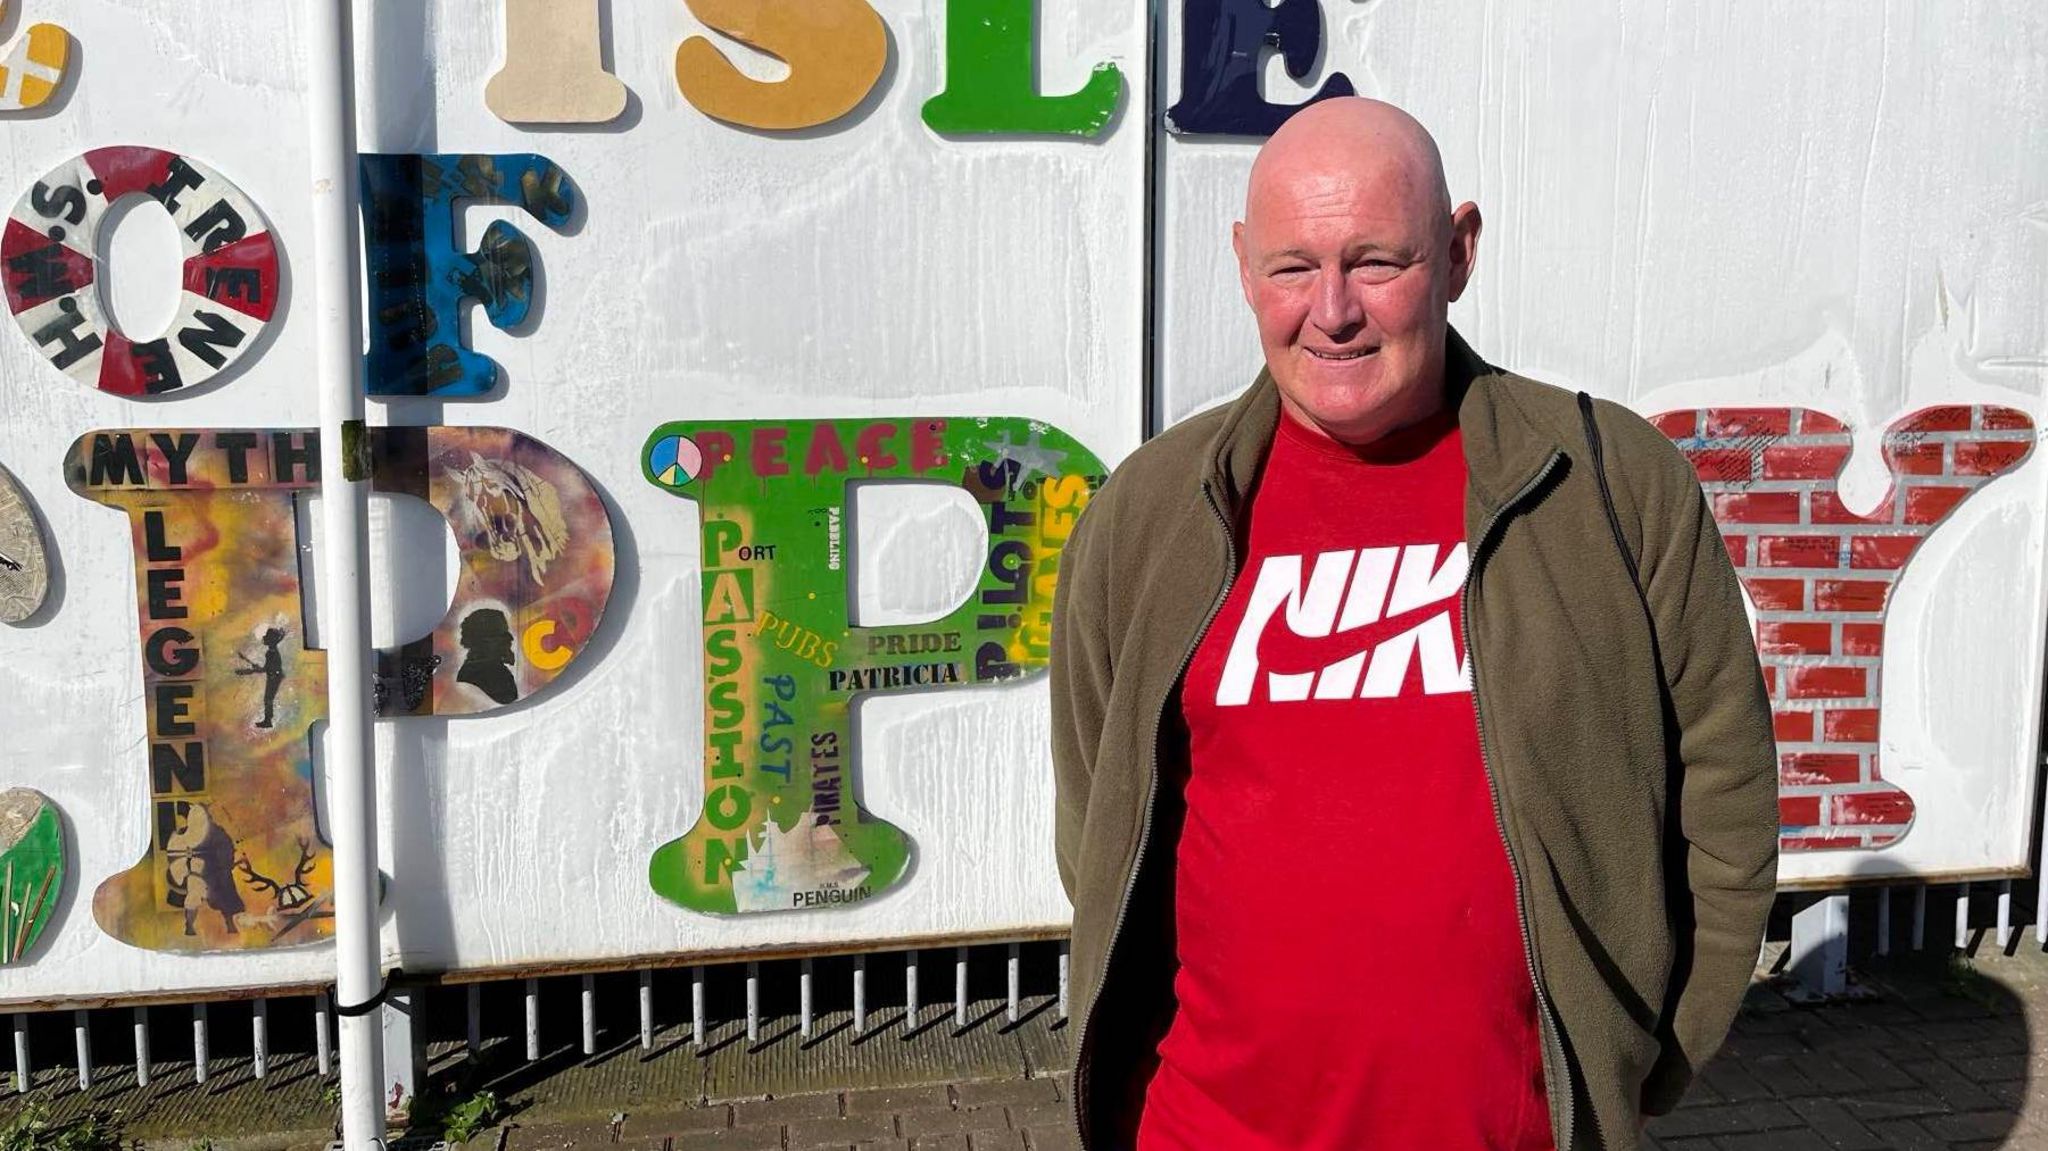 A bald white man in a red Nike t-shirt and brown fleece stands in front of the Isle of Sheppey sign at Sheerness train station